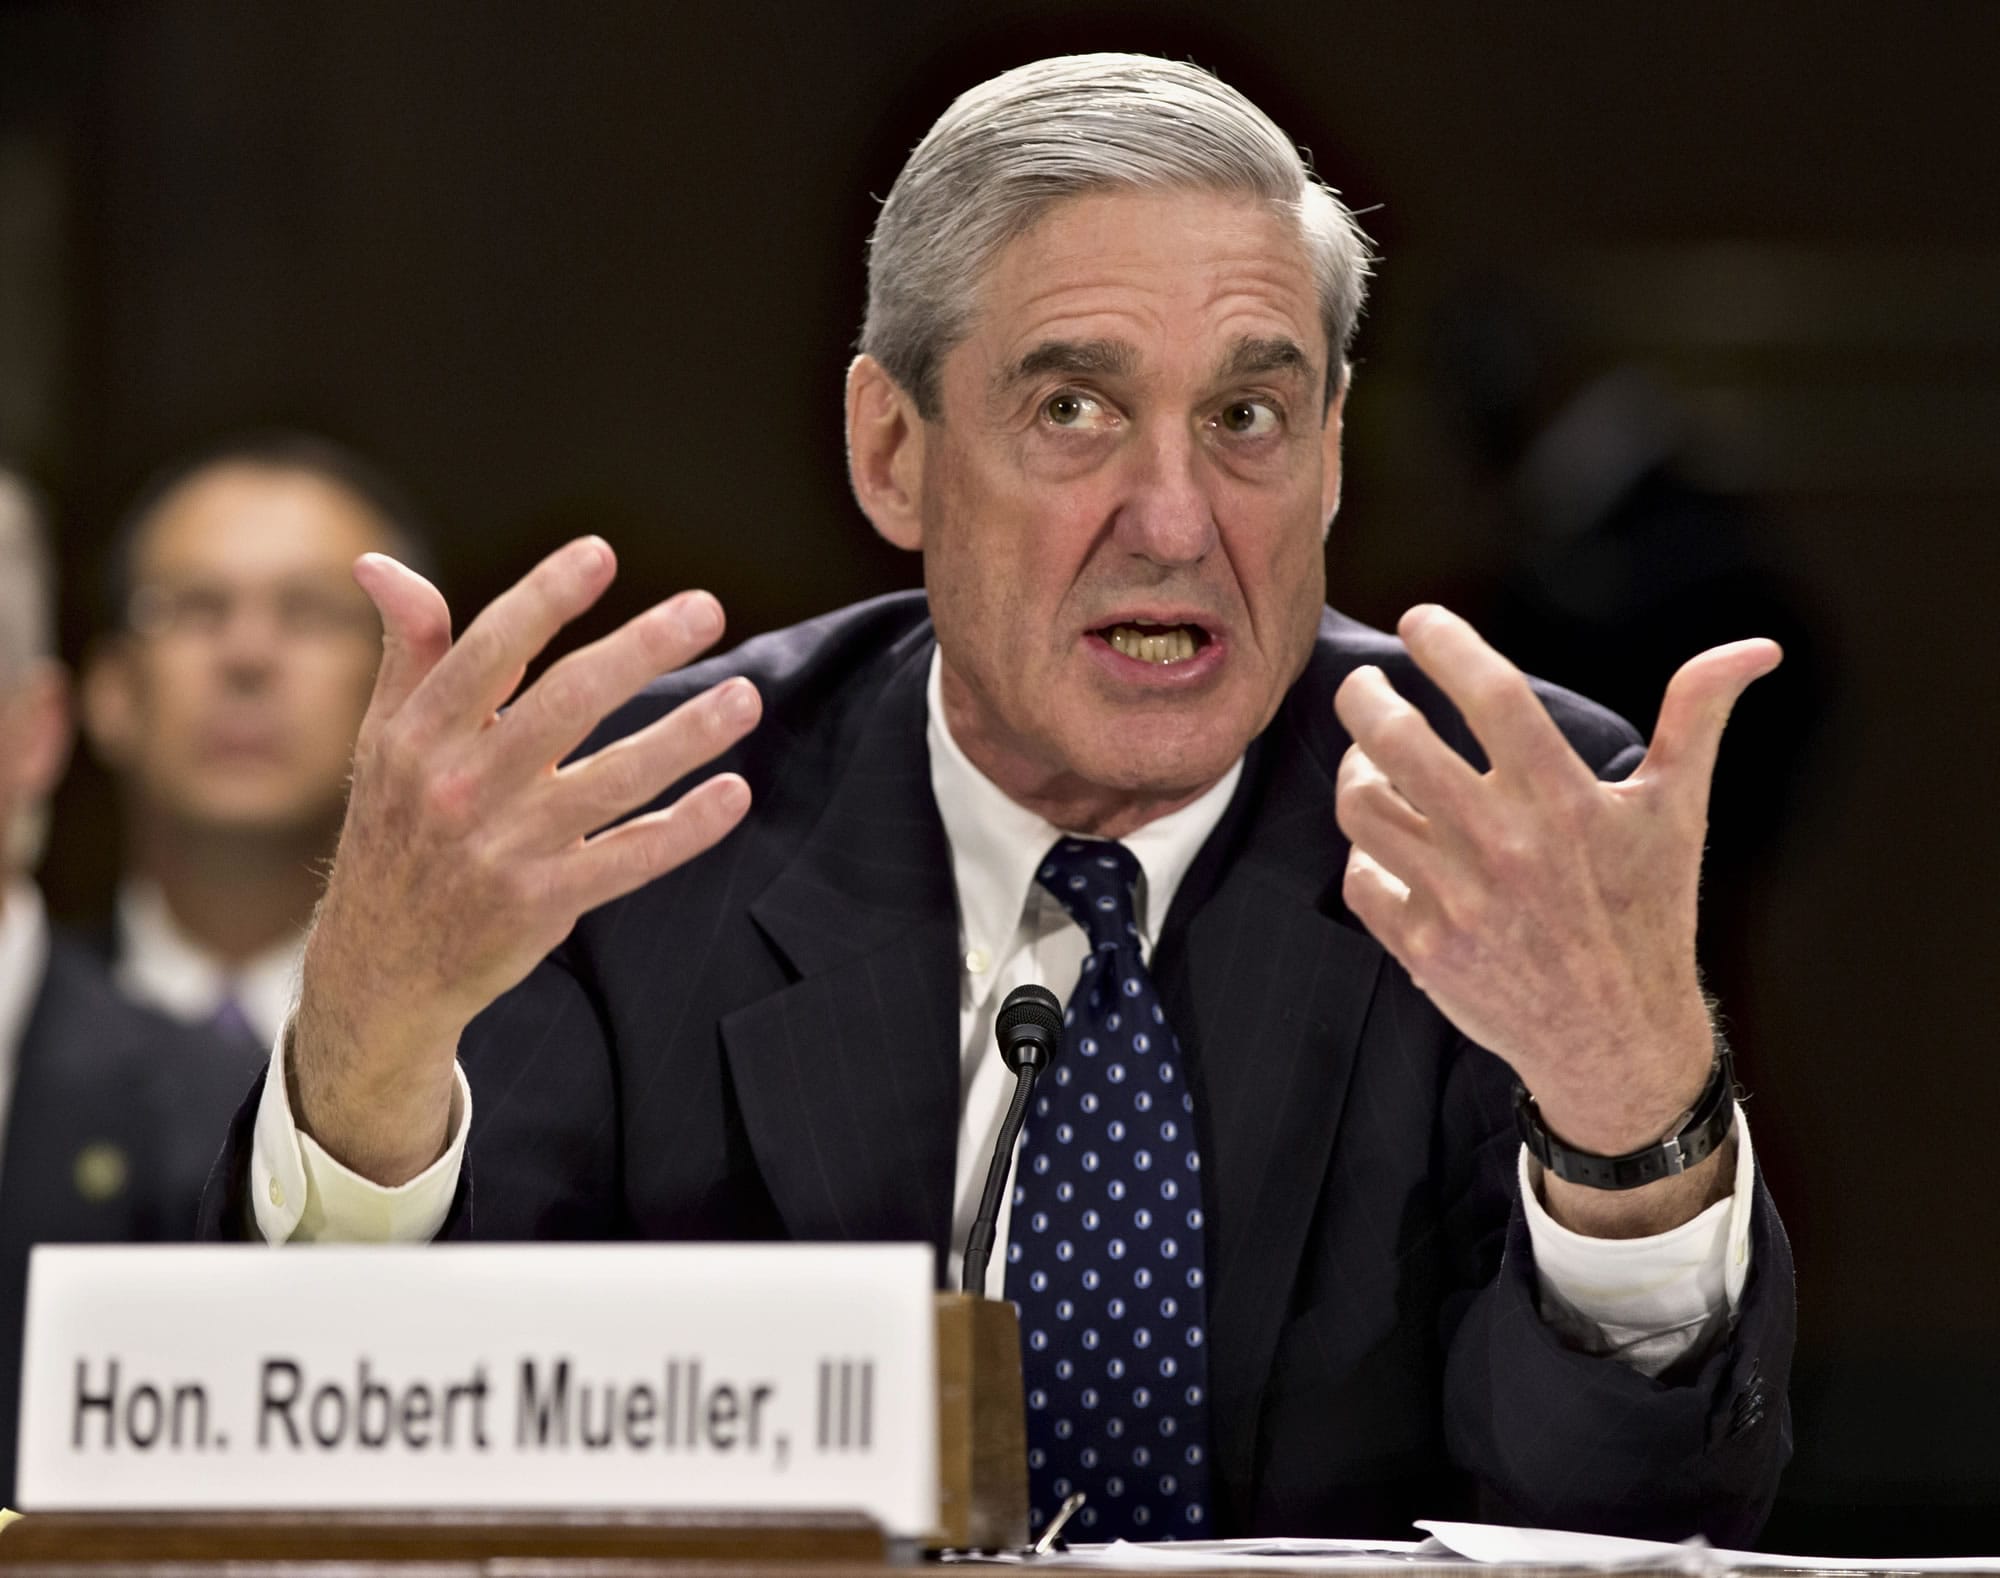 FILE - In this June 19, 2013, file photo, former FBI Director Robert Mueller testifies on Capitol Hill in Washington. On May 17, 2017, the Justice Department said is appointing Mueller as special counsel to oversee investigation into Russian interference in the 2016 presidential election. (AP Photo/J.